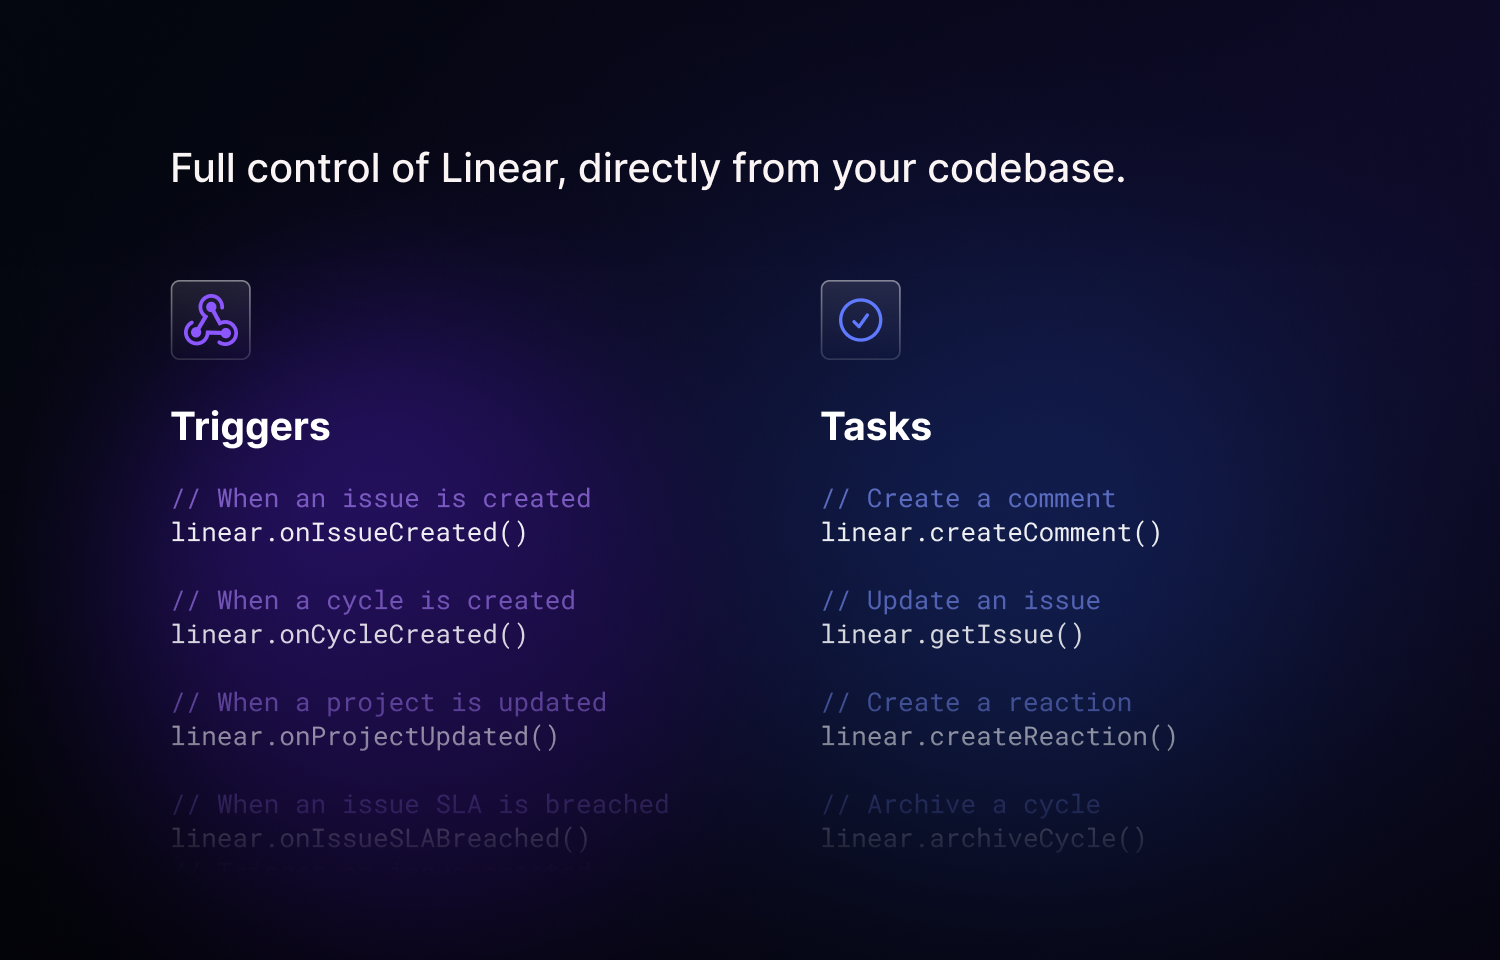 Full control of Linear, directly from your codebase.